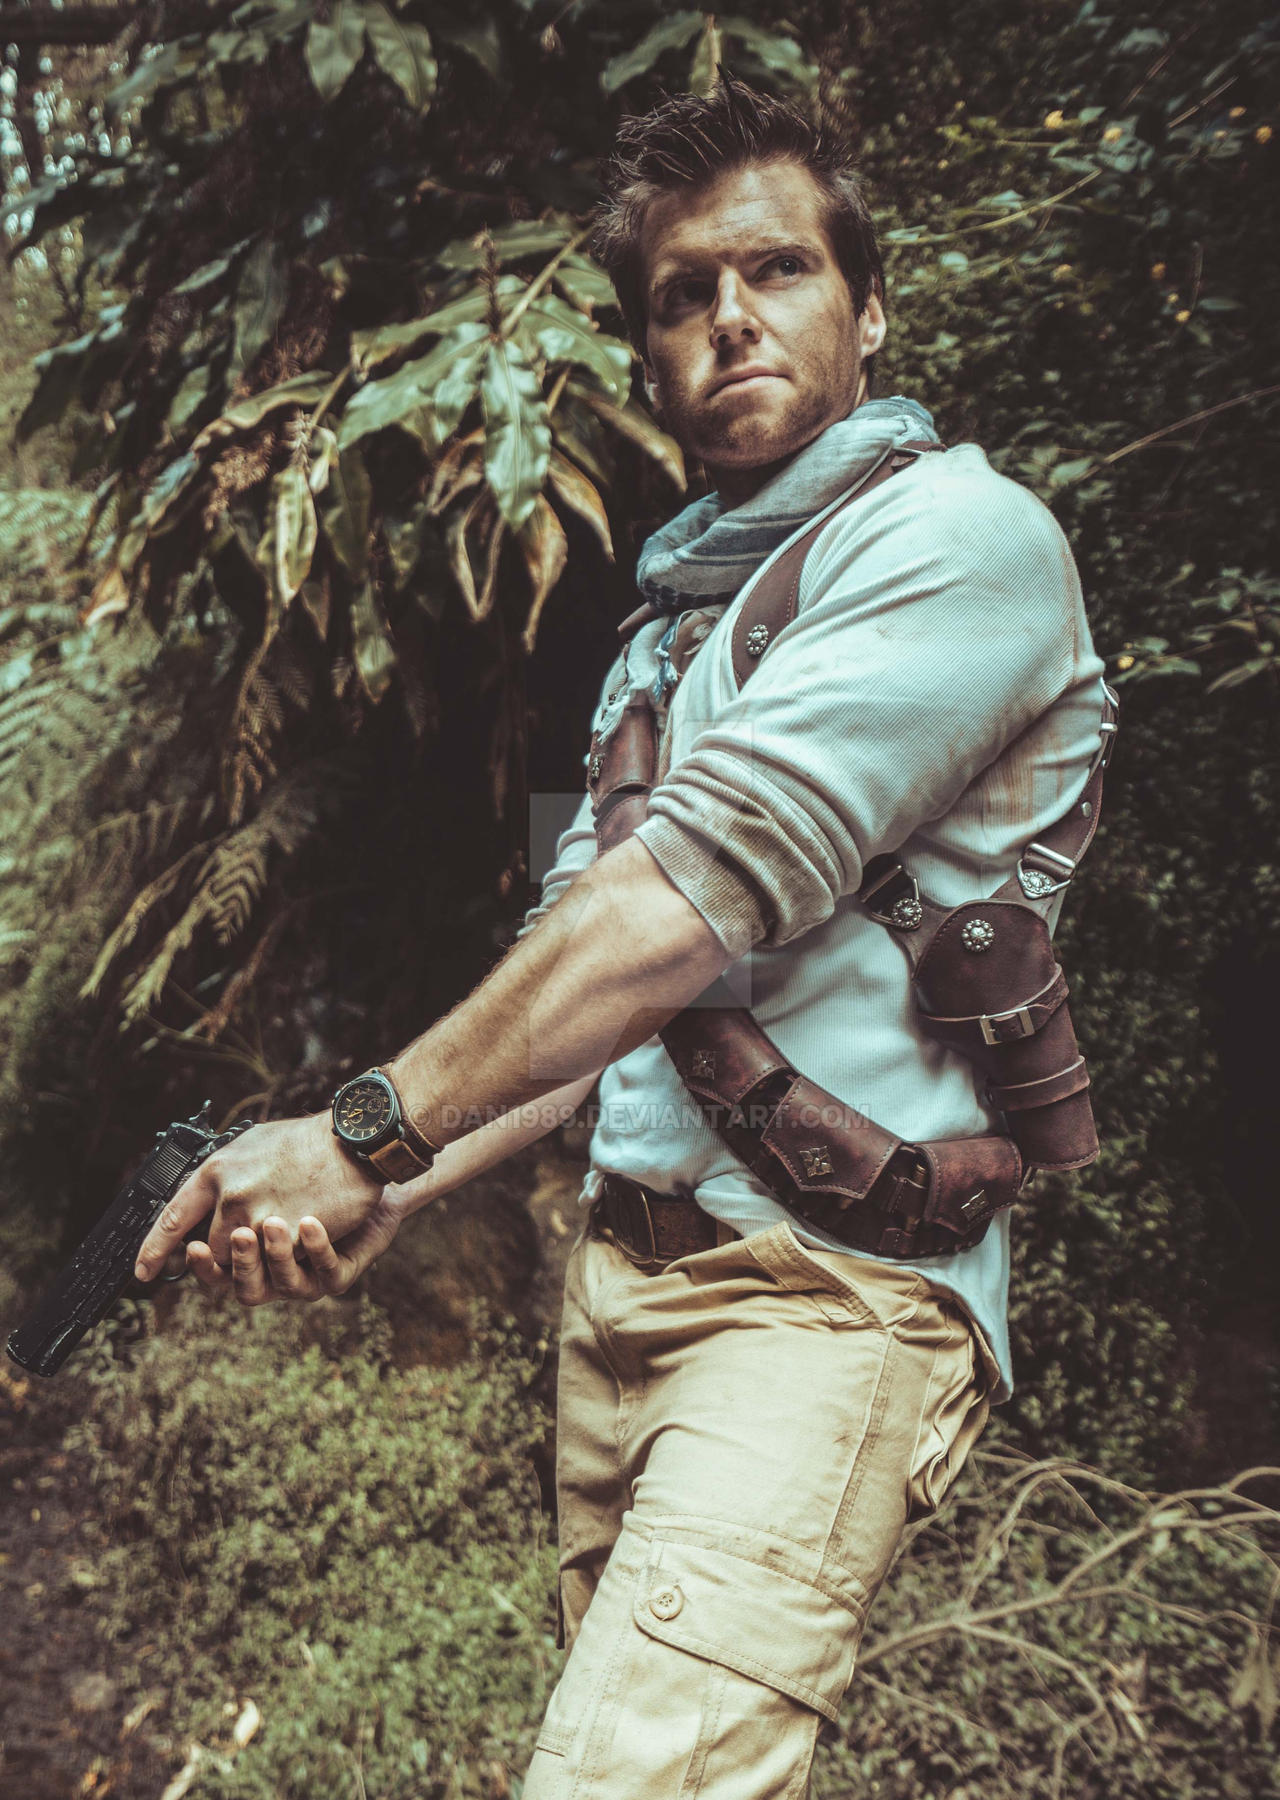 Uncharted - Nathan Drake + Elena Fisher #43 by dan1989 on DeviantArt